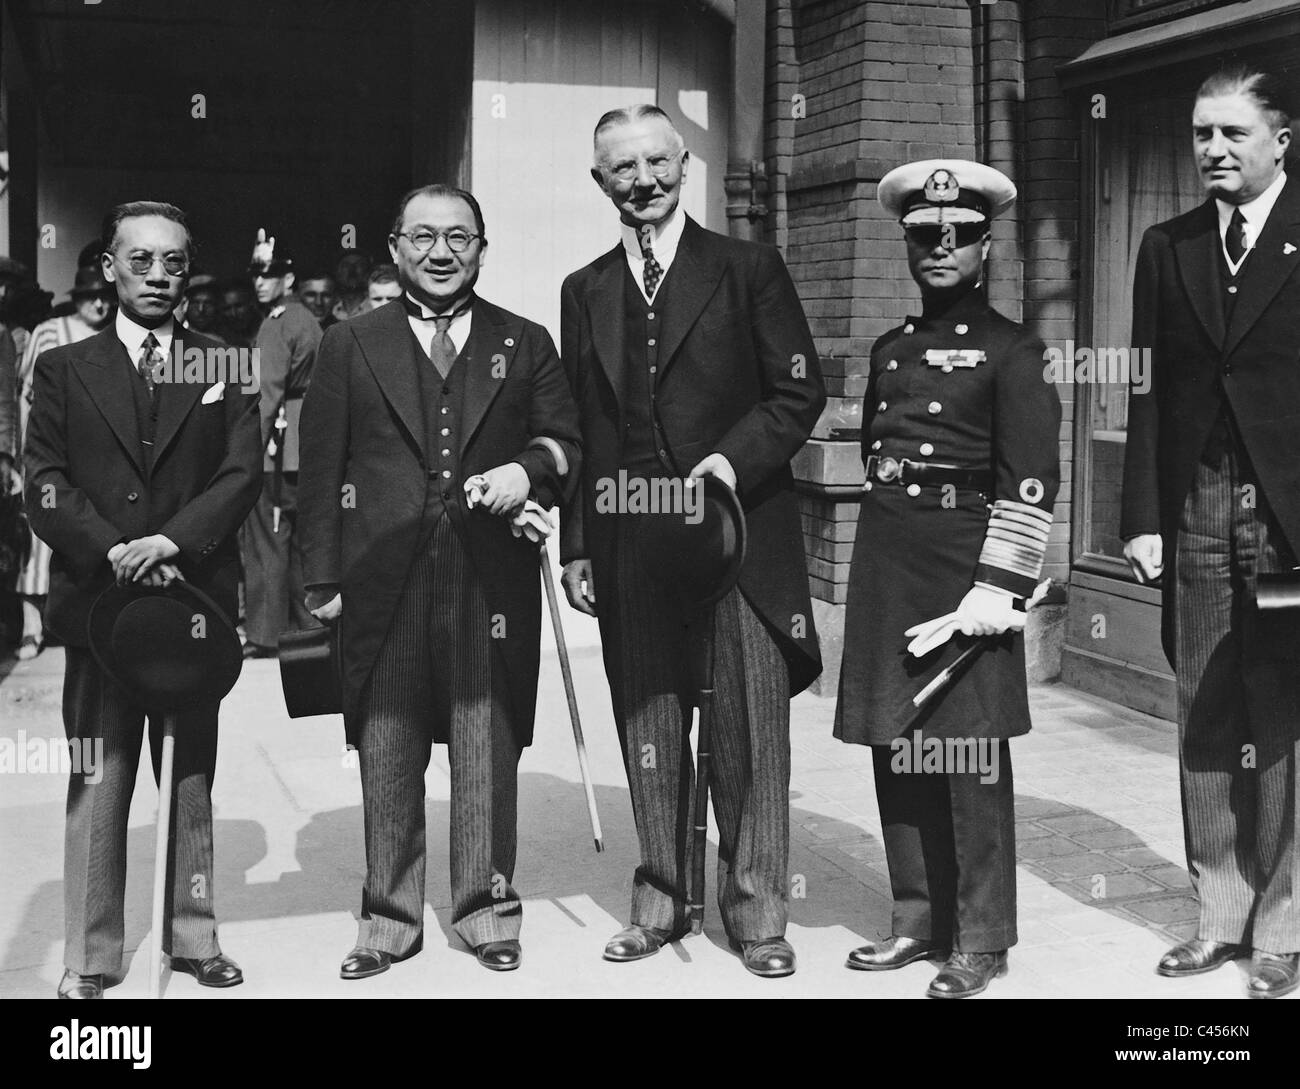 Hjalmar Schacht receives a Chinese delegation at the Friedrichstrasse station, 1937 Stock Photo